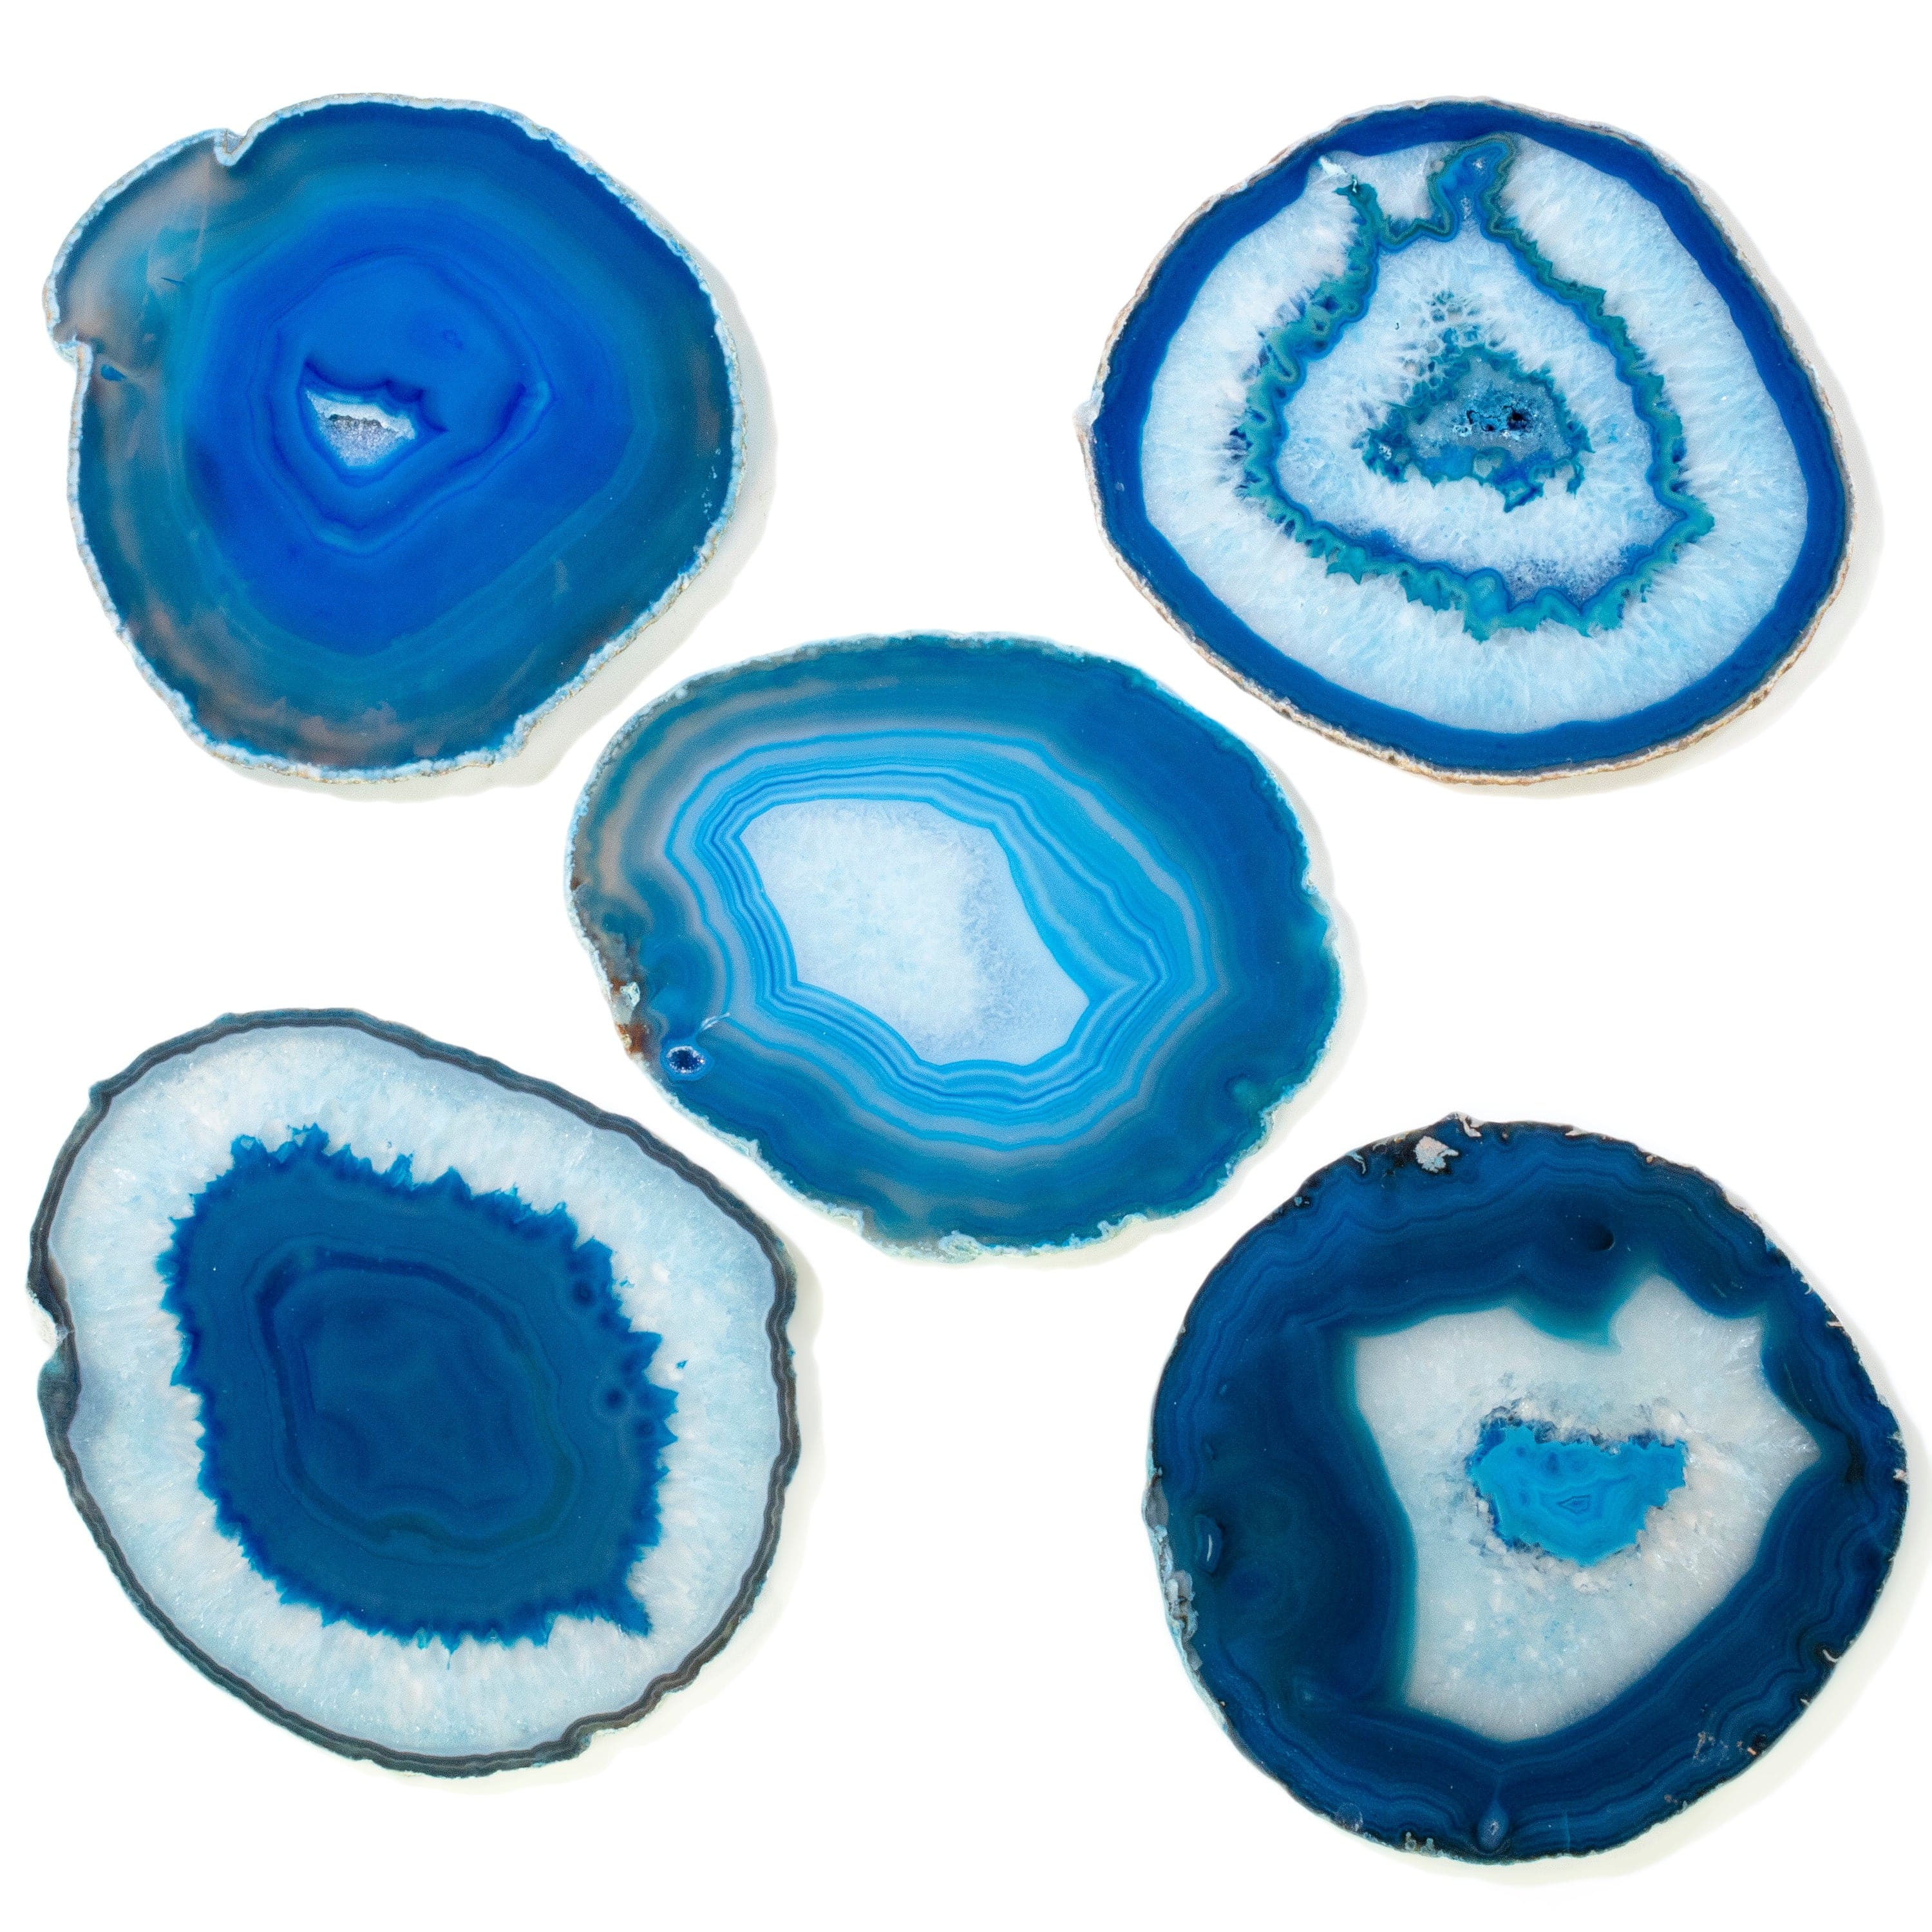 KALIFANO Agate Blue Agate Slice Drink Coaster BAS160-BE